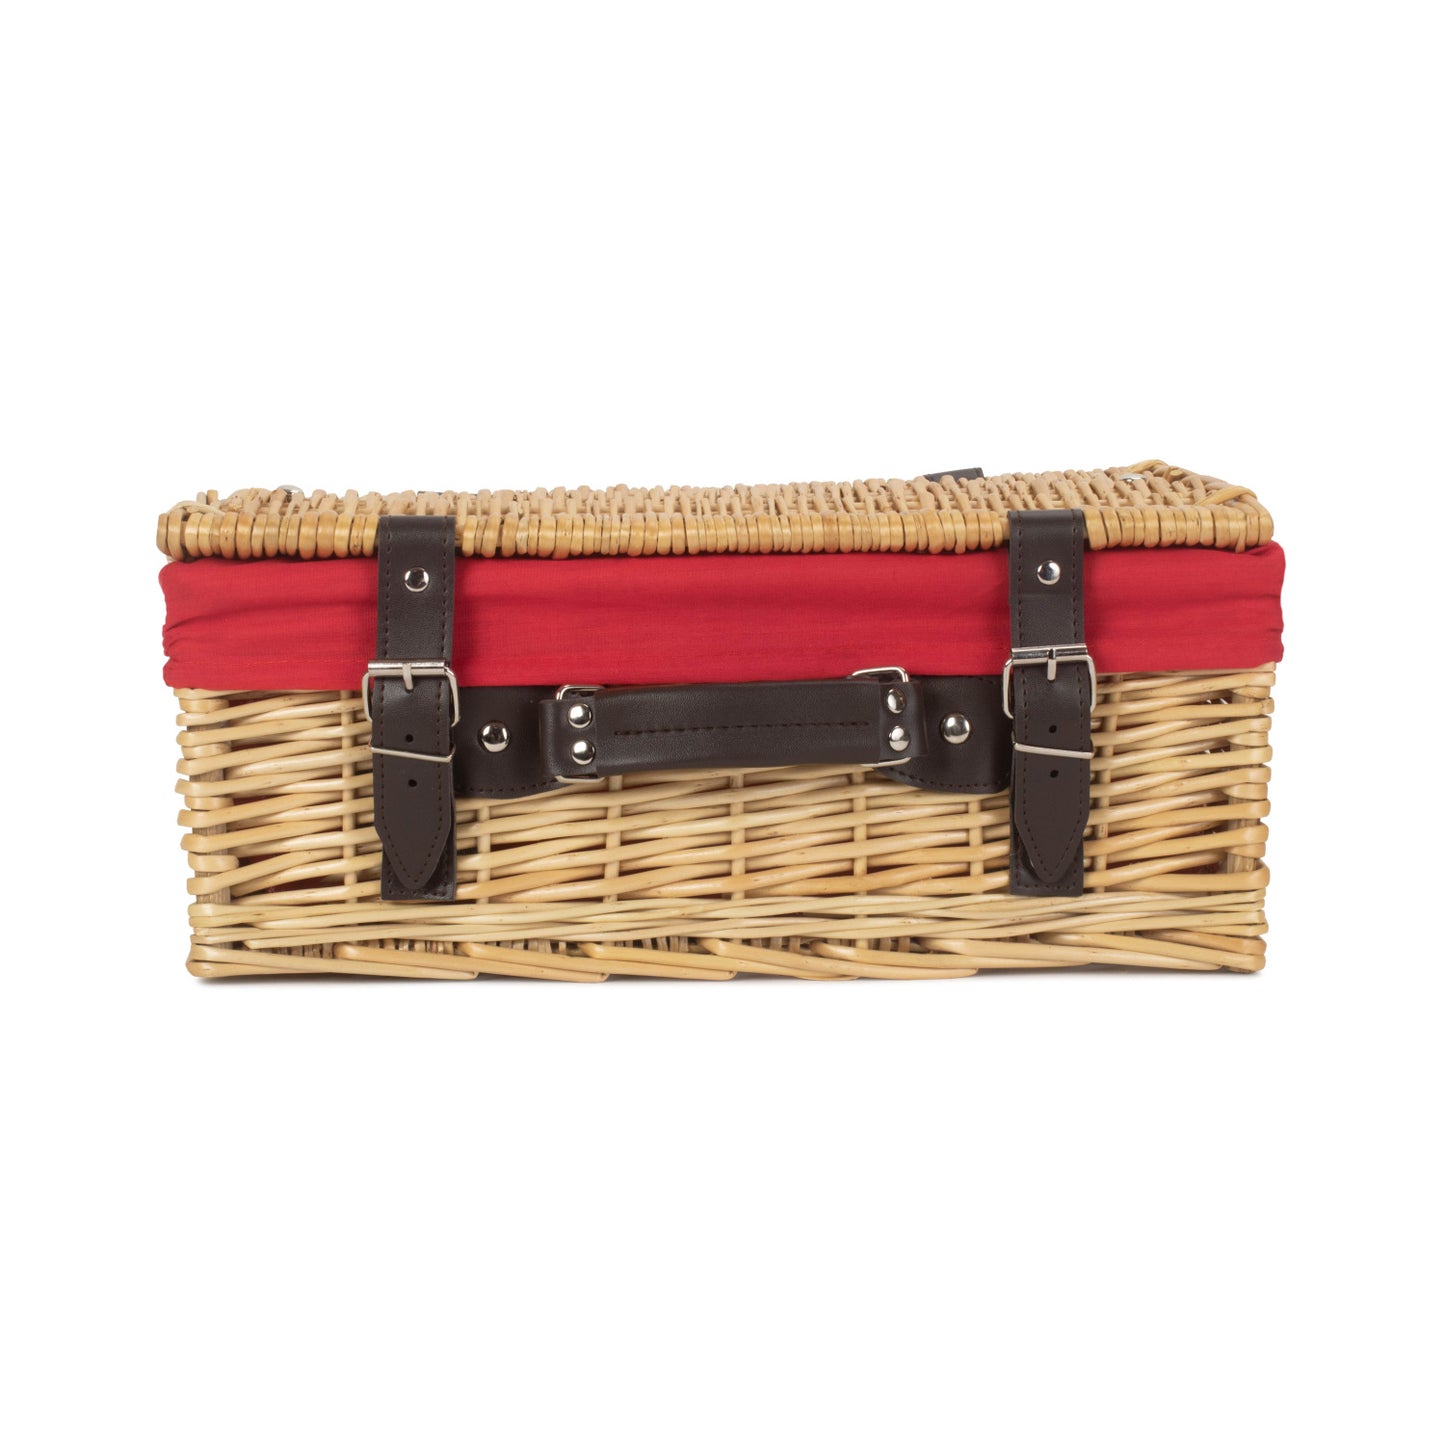 14 Inch Wicker Hamper With Red Lining